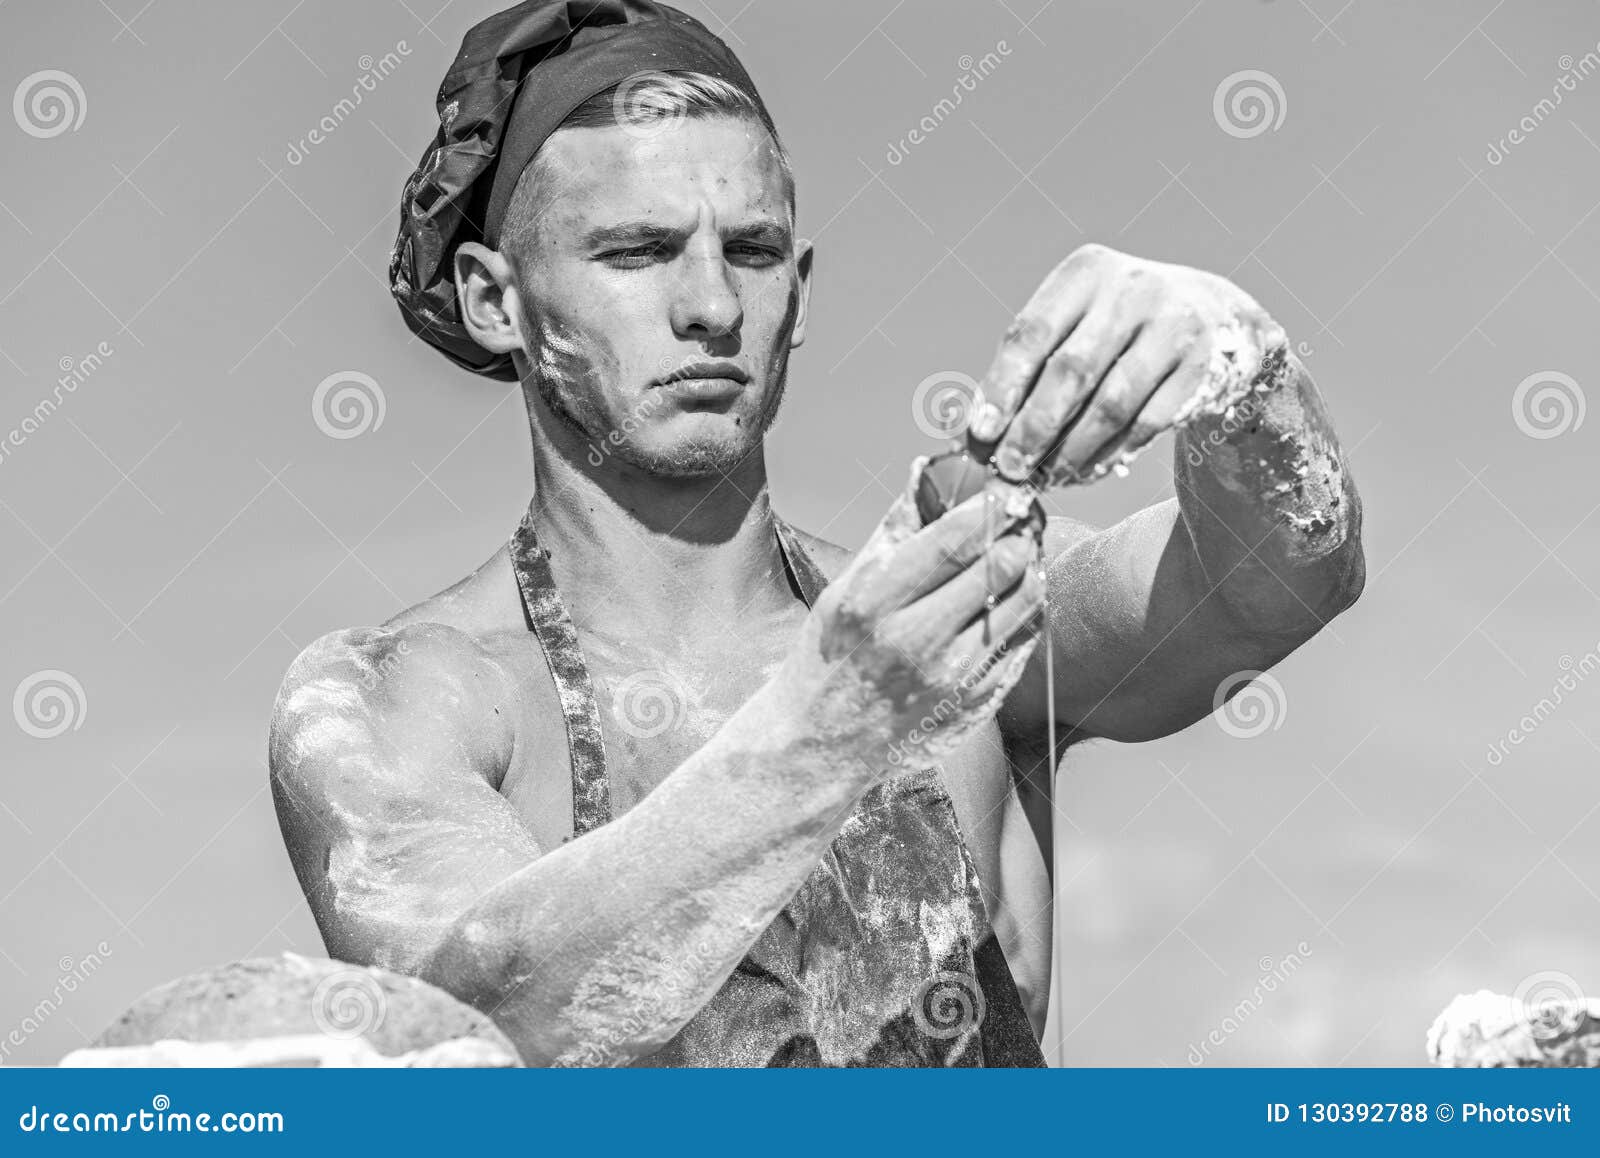 Man Muscular Baker Or Cook Covered With Flour Working Outdoor Sky On 